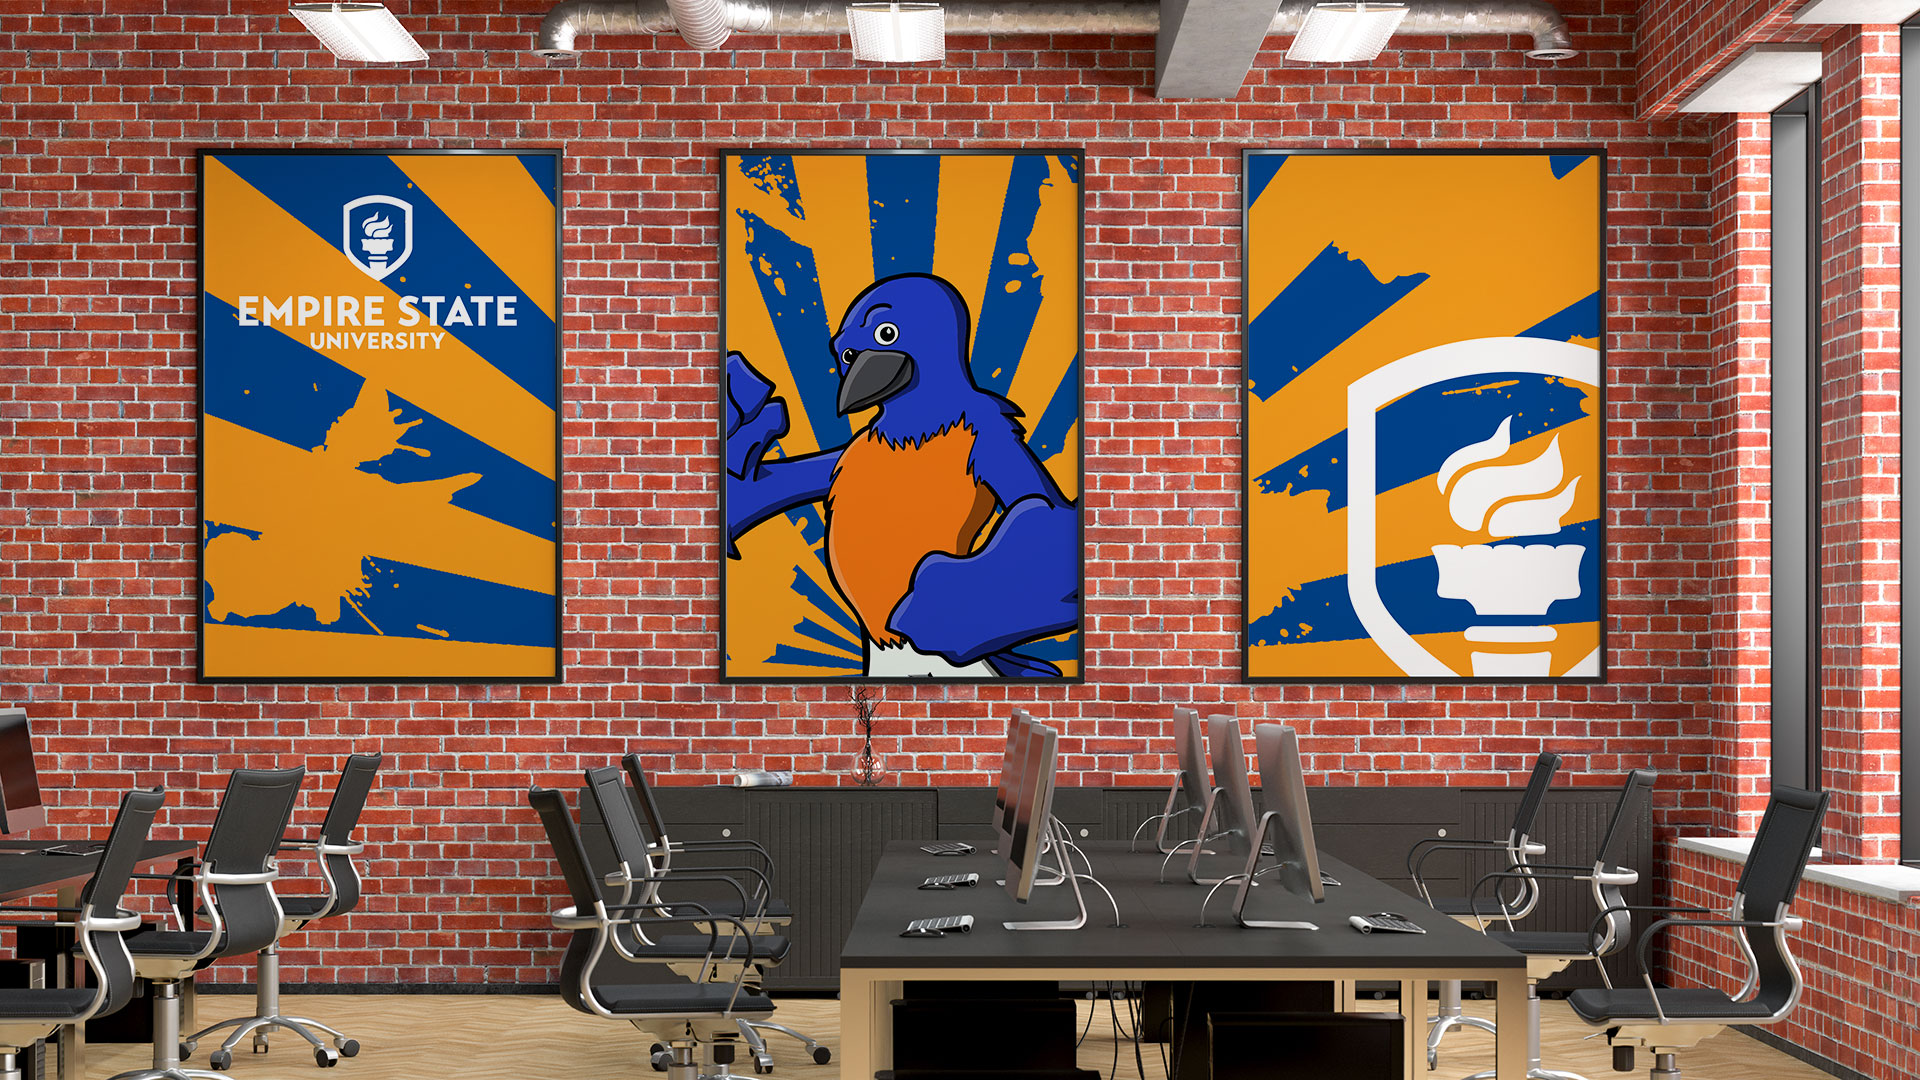 Teams background of a brick interior room with 3 posters of the logo, Blue, and the shield